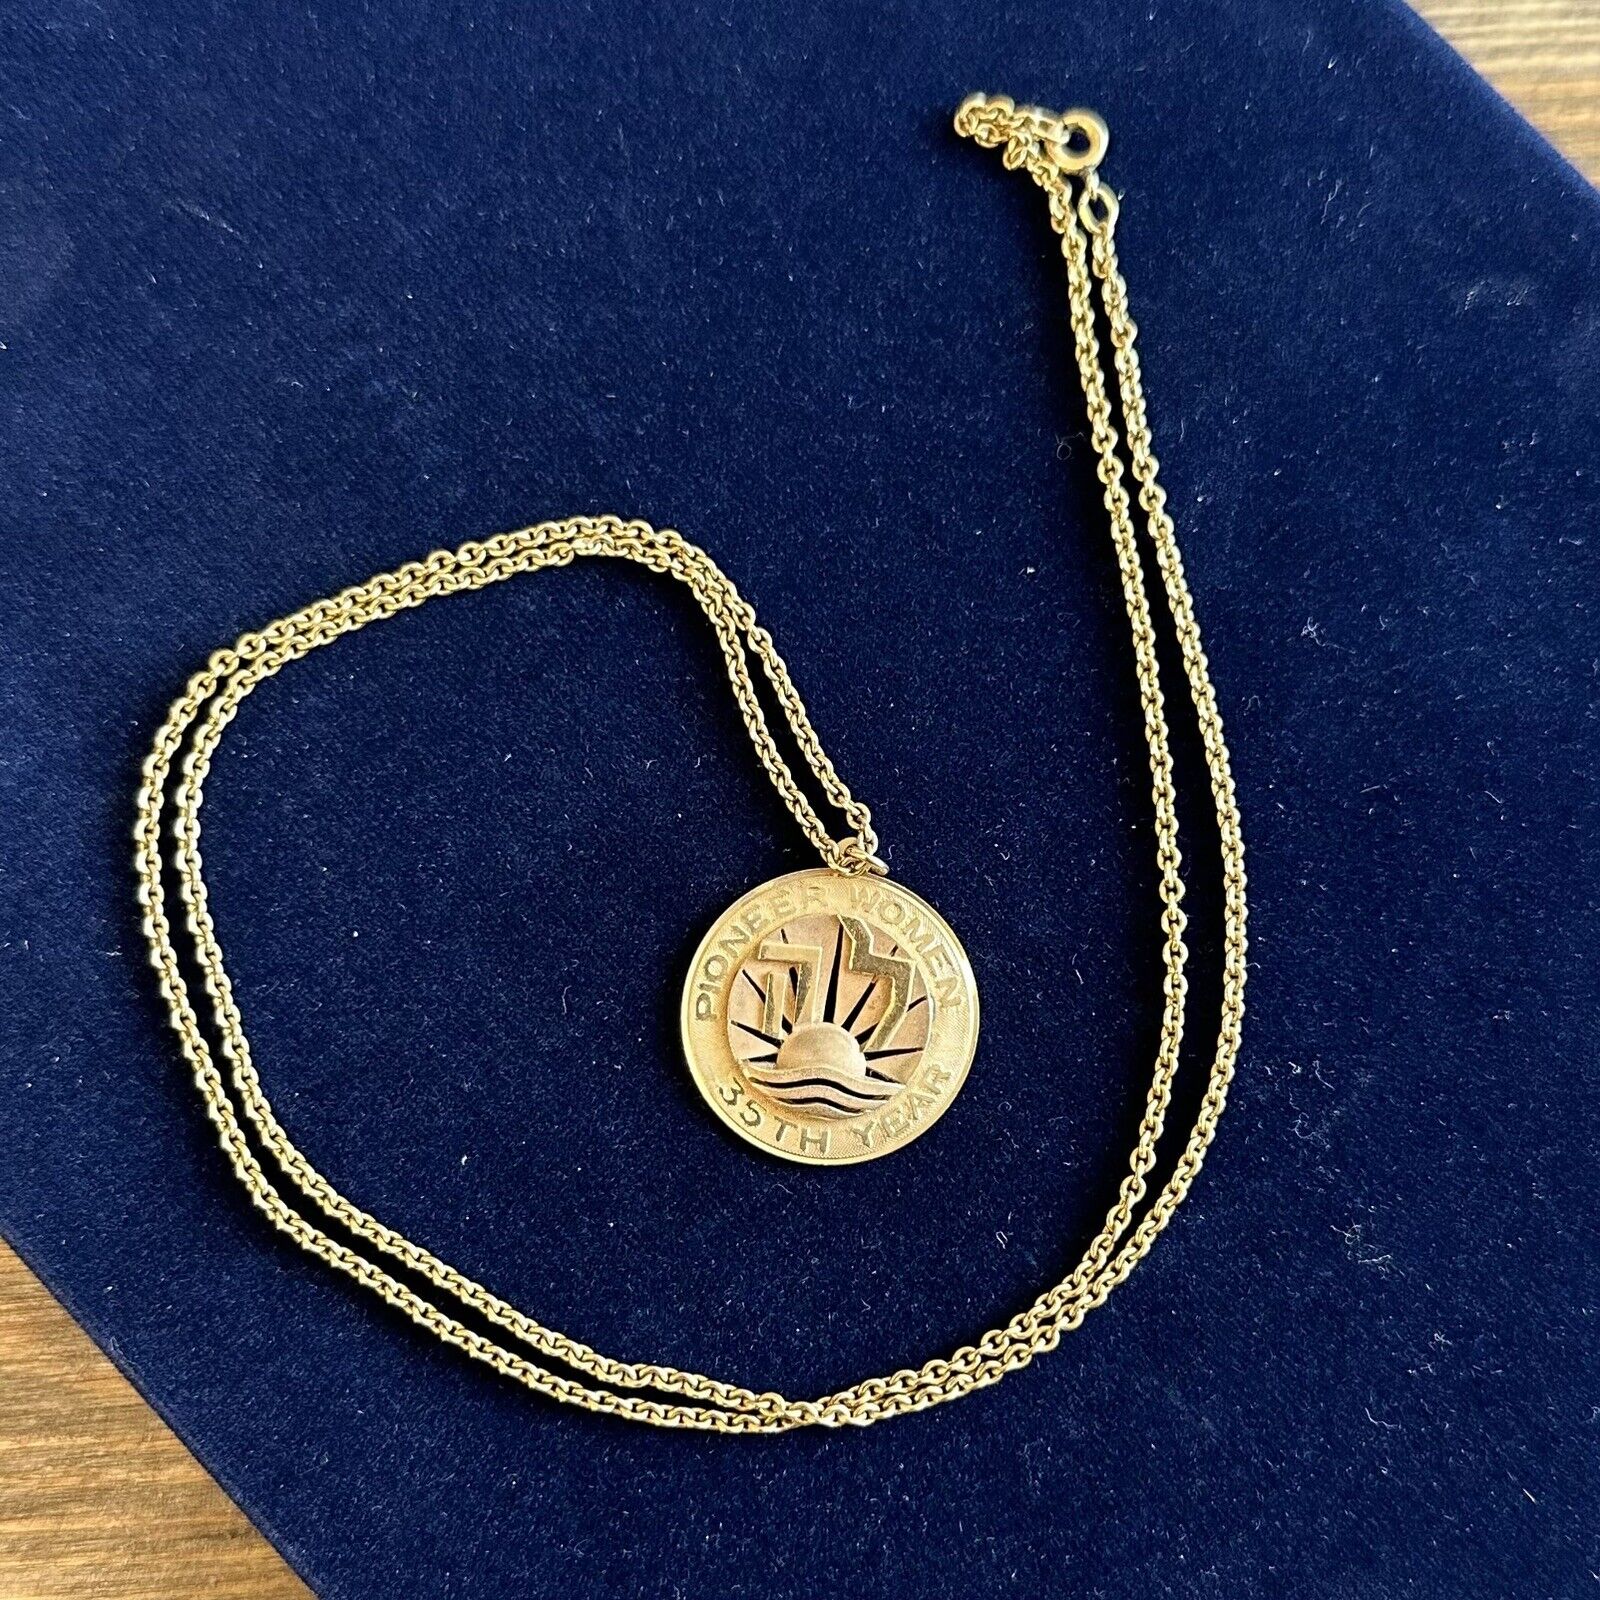 Vintage 1960 Jewish Na'amat 14k Gold Necklace Pendant 35th Year Pioneer Women